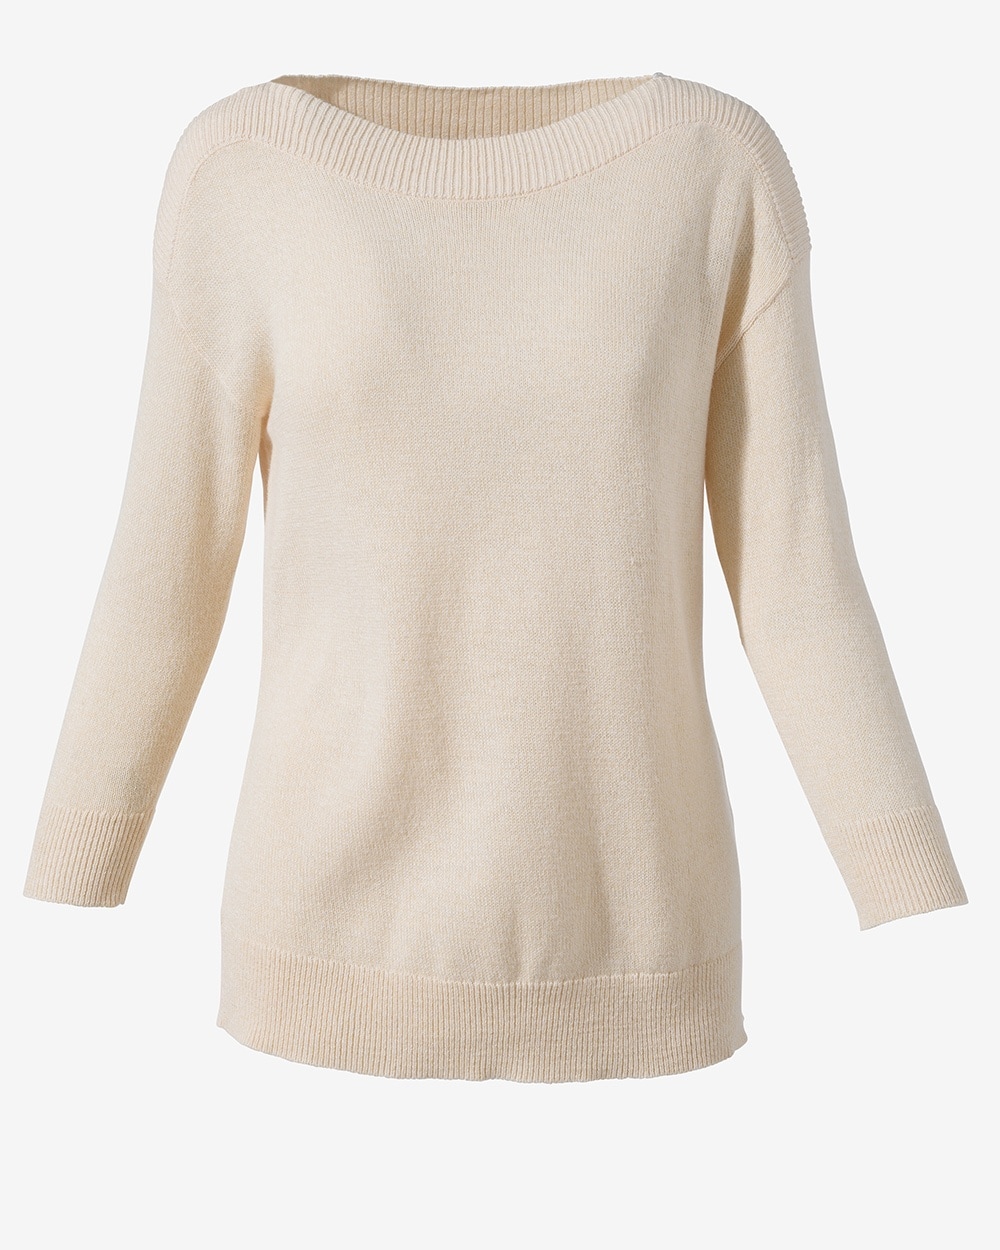 Ribbed Boat-Neck 3/4-Sleeve Sweater